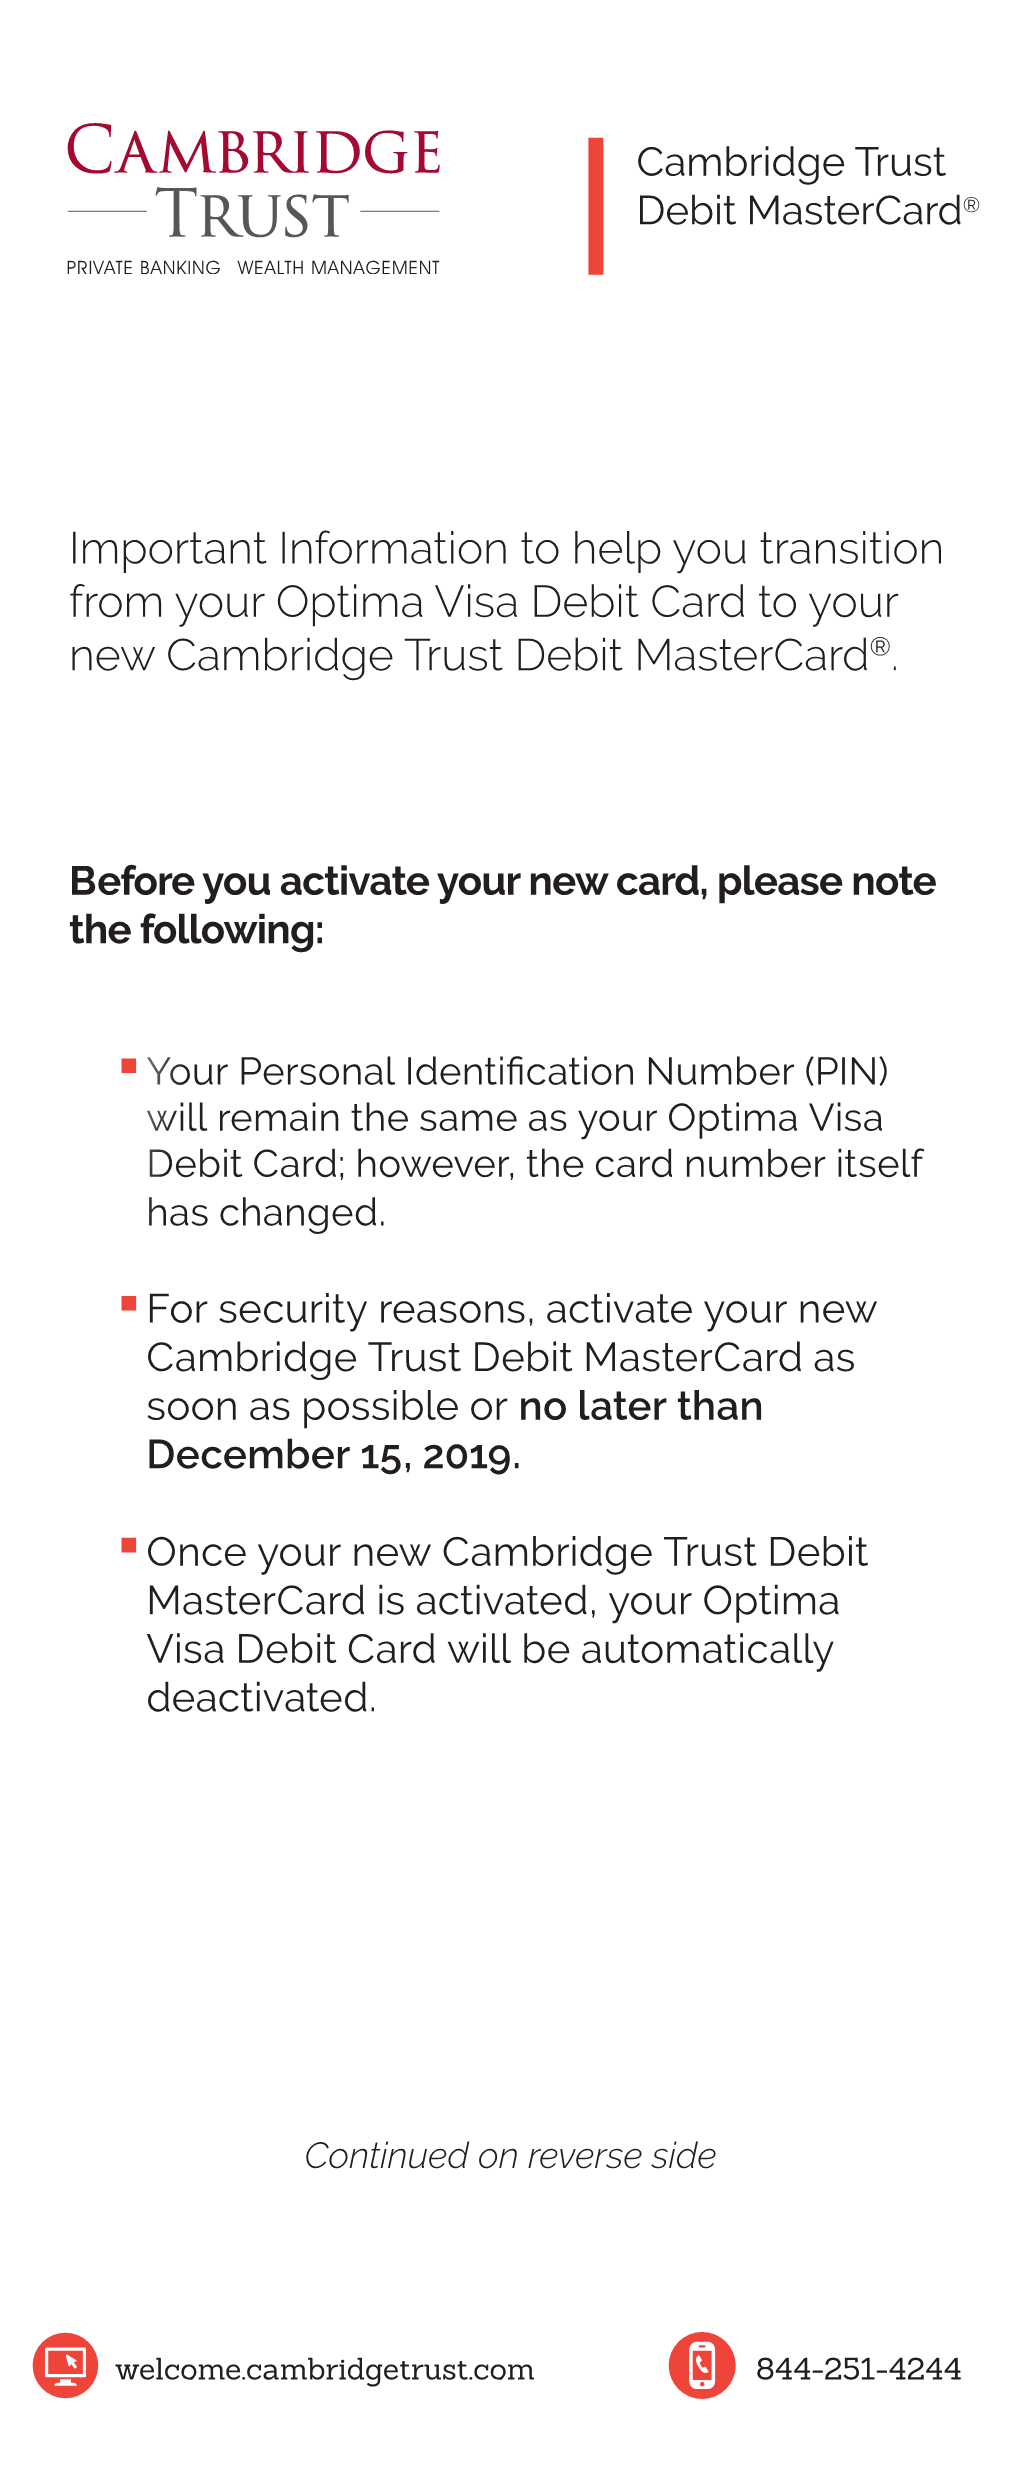 Important Information to Help You Transition from Your Optima Visa Debit Card to Your New Cambridge Trust Debit Mastercard®